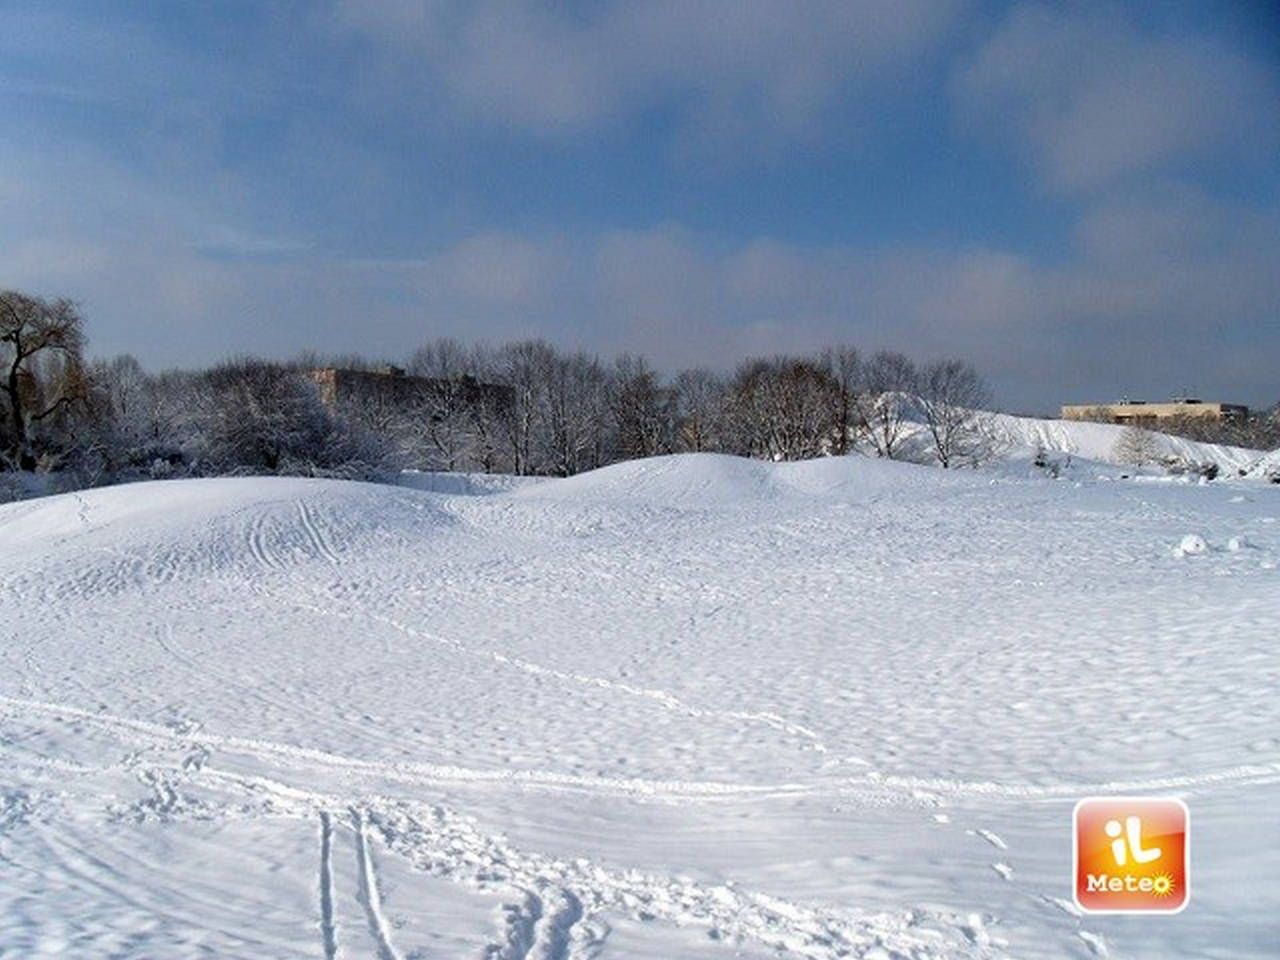 Snow today, Friday 20 scattered clouds, Saturday 21 cloudy sky » ILMETEO.it